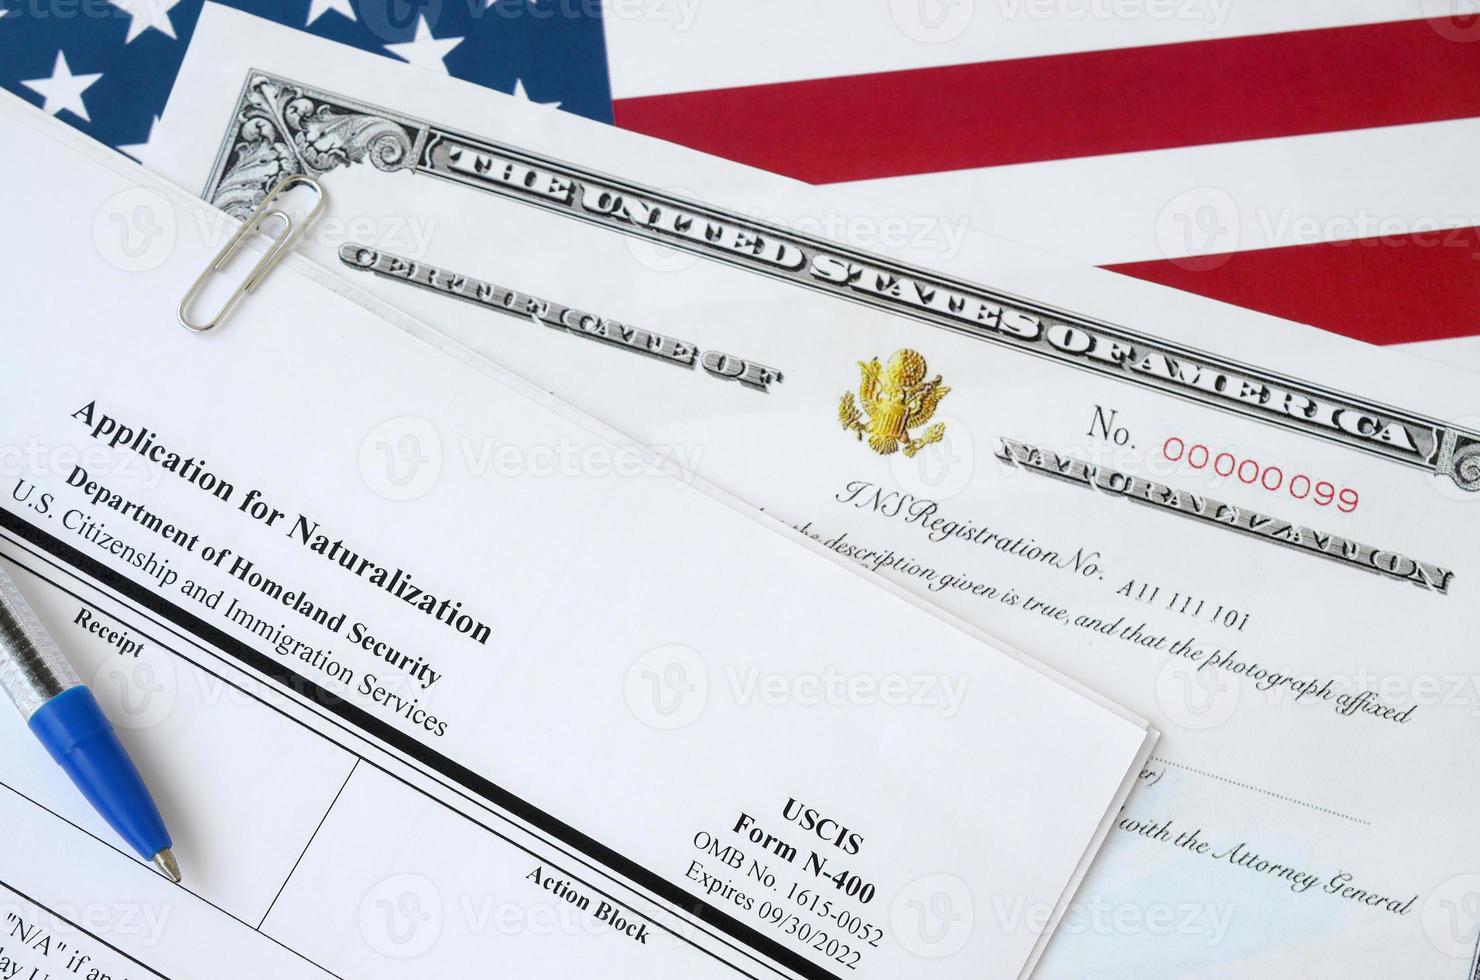 N-400 Application for Naturalization and Certificate of naturalization lies on United States flag with blue pen from Department of Homeland Security photo